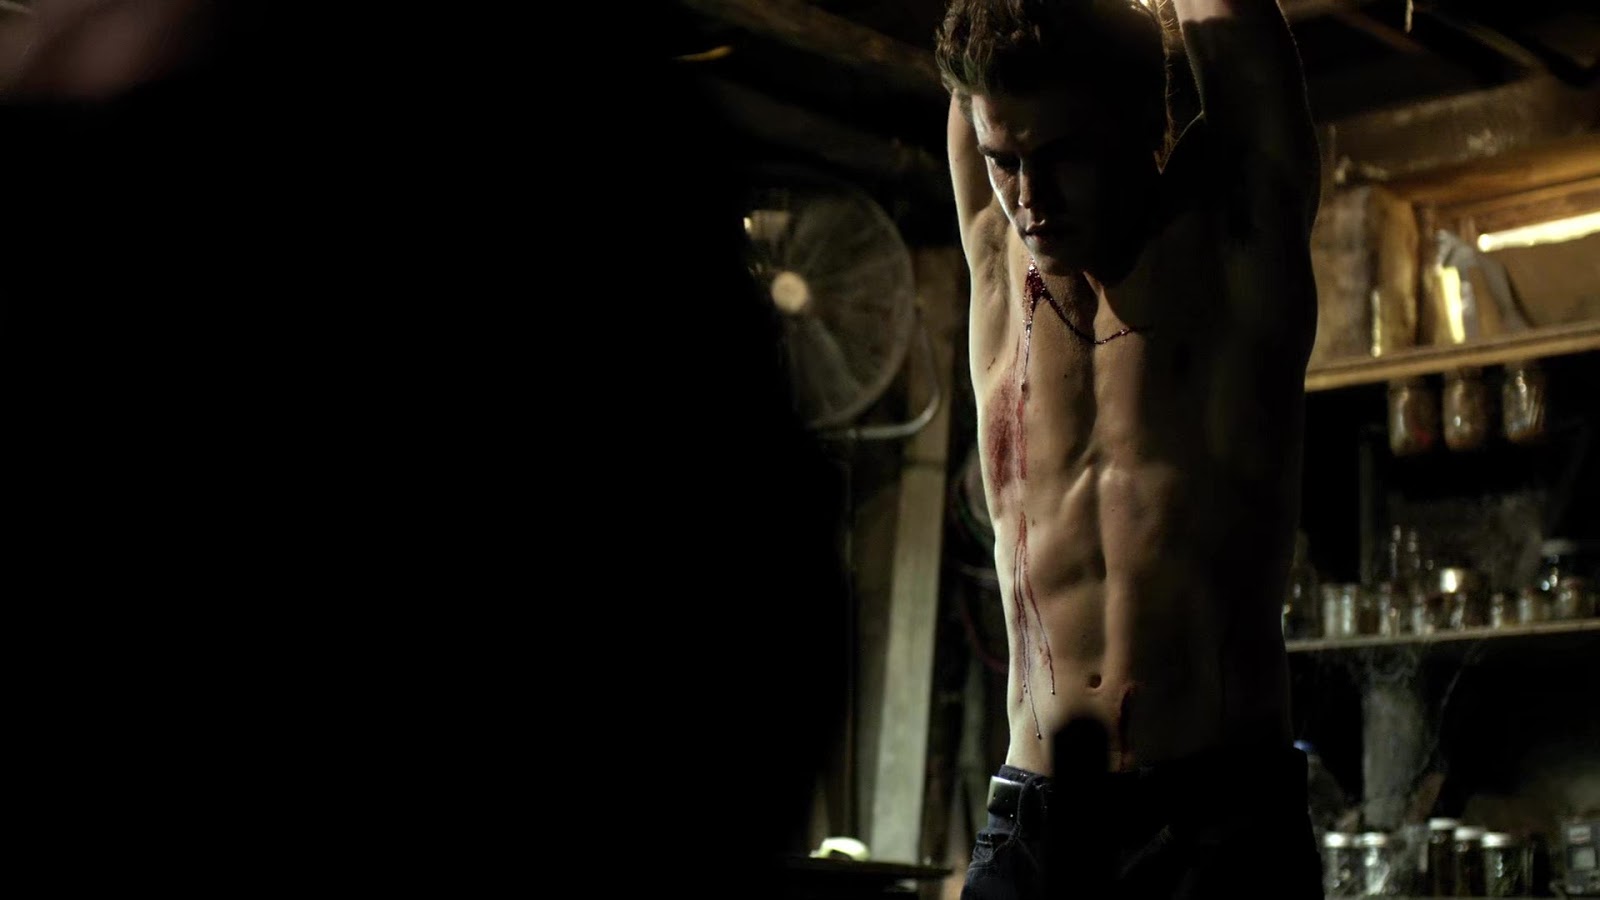 ausCAPS: Paul Wesley shirtless in The Vampire Diaries 1-17 "